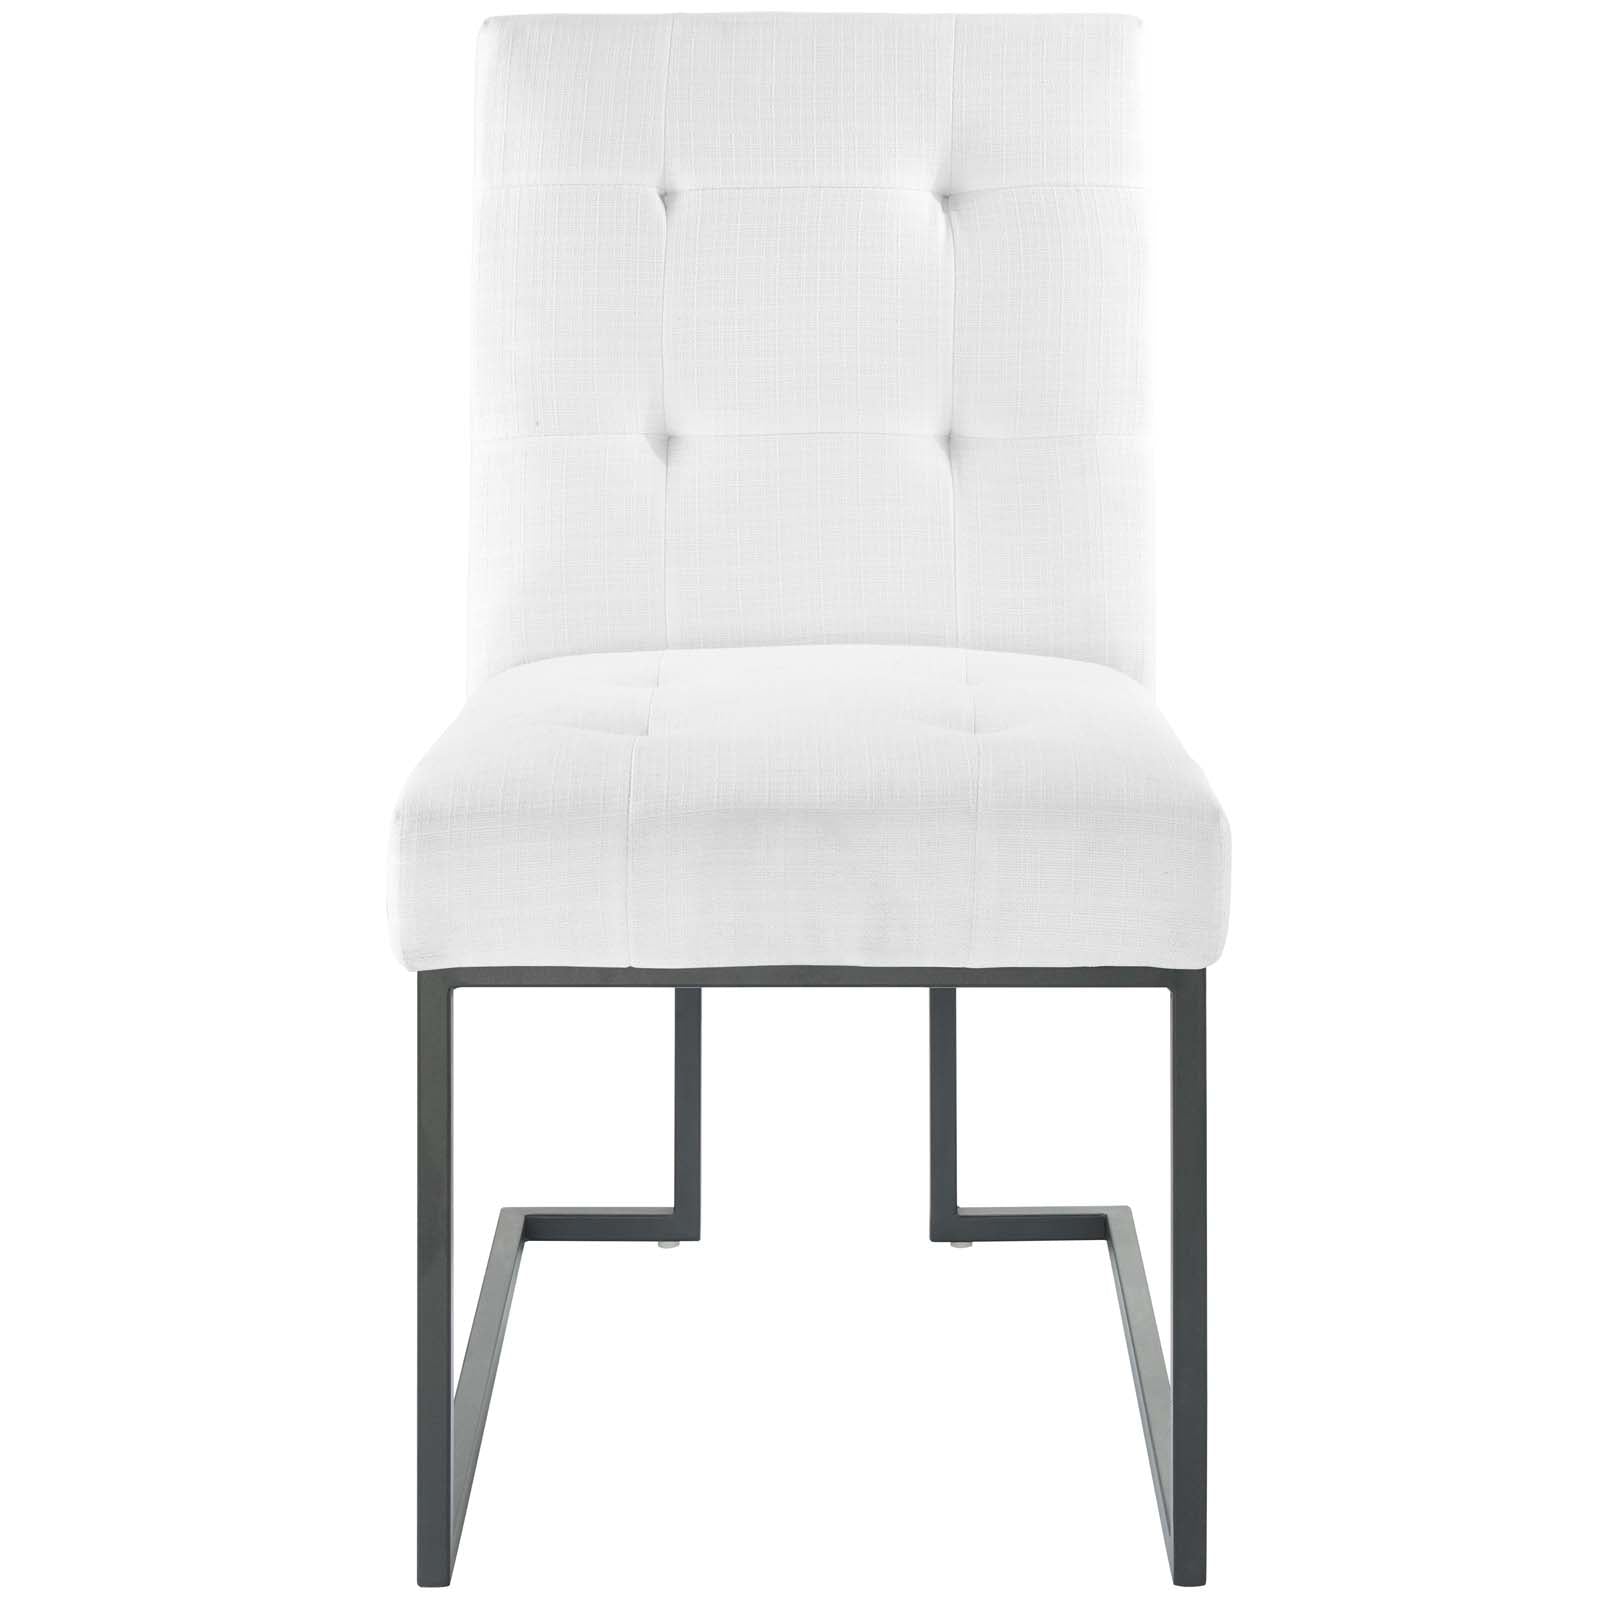 Modway Dining Chairs - Privy Black Stainless Steel Upholstered Fabric Dining Chair Black White